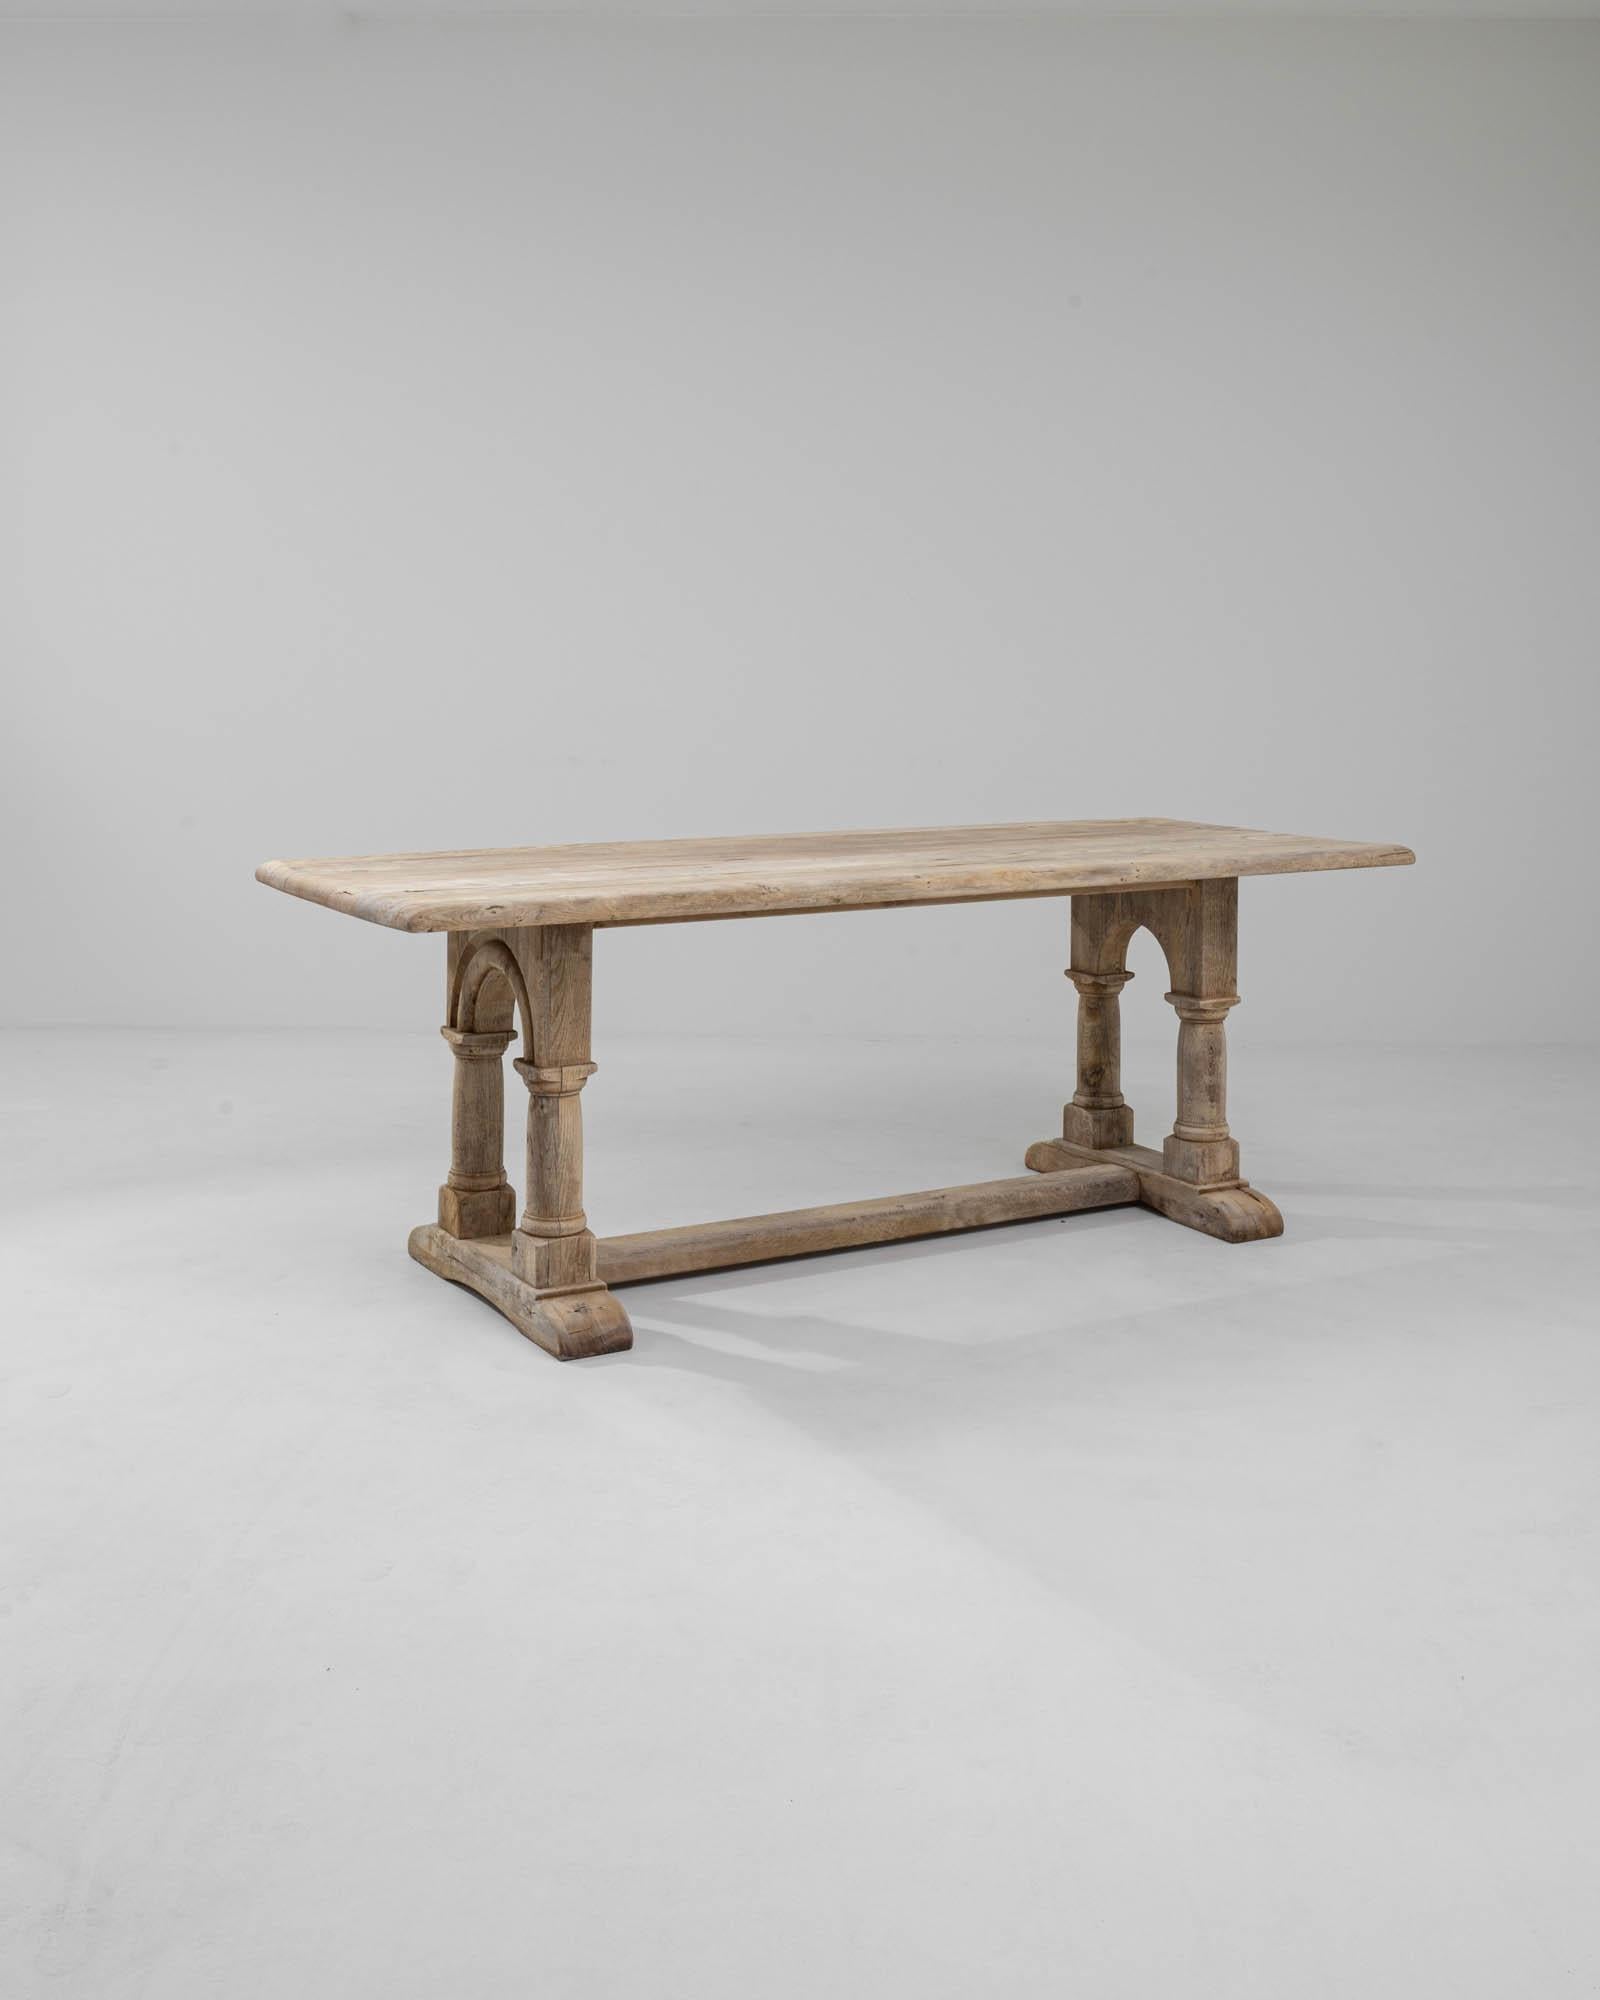 A wooden dining table made in 20th century Belgium. This stout and sturdily constructed trestle table is composed of two pairs of legs who stand like columns, connected by towering arches. A delicate bleaching process has spread across its surface